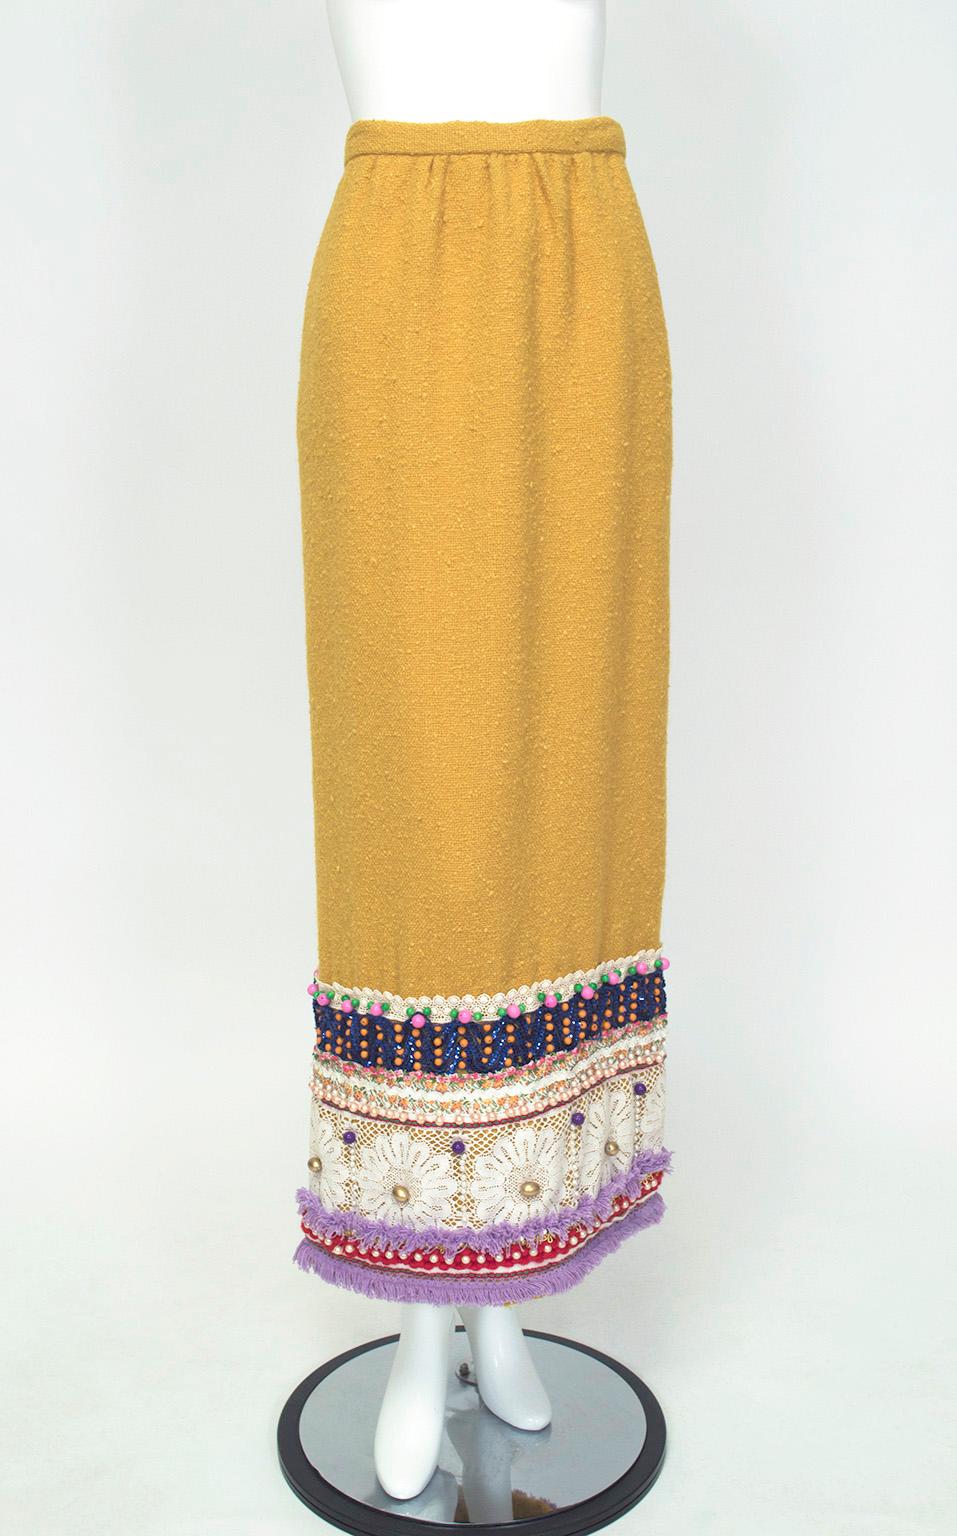 Understated it is not, but somehow this skirt—which looks like the result of a threesome between a bath mat, several doilies and your grandmother’s pearls—manages not to be gaudy.  Surprisingly, the mustard yellow acts as a neutral and pairs